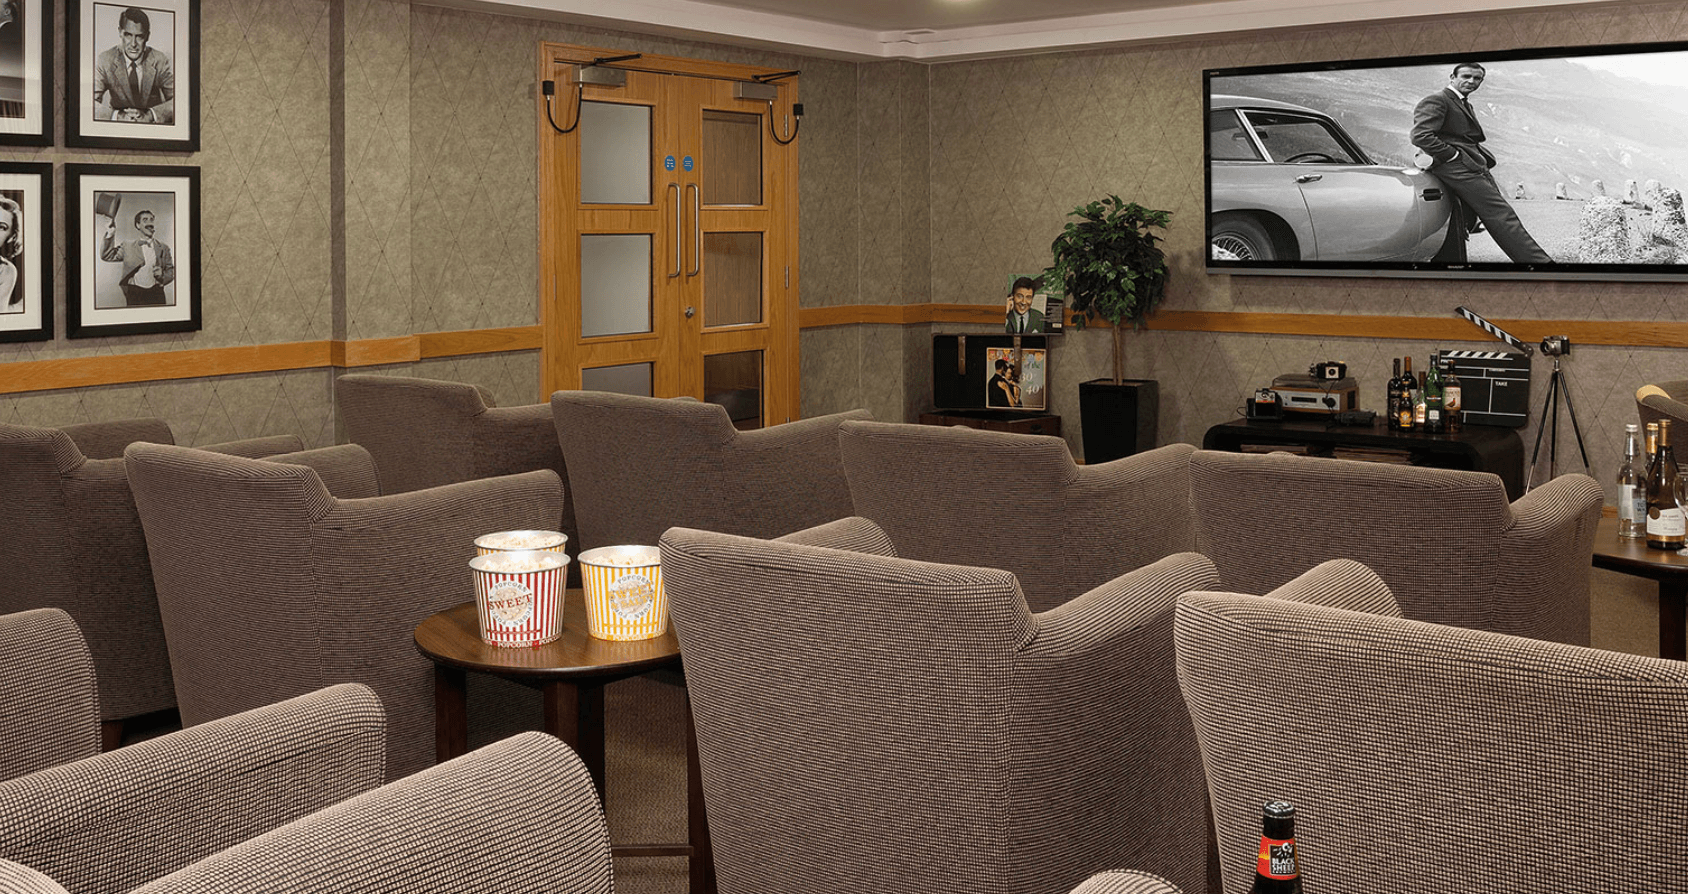 Cinema at Aaron Court Care Home in Leicester, Leicestershire